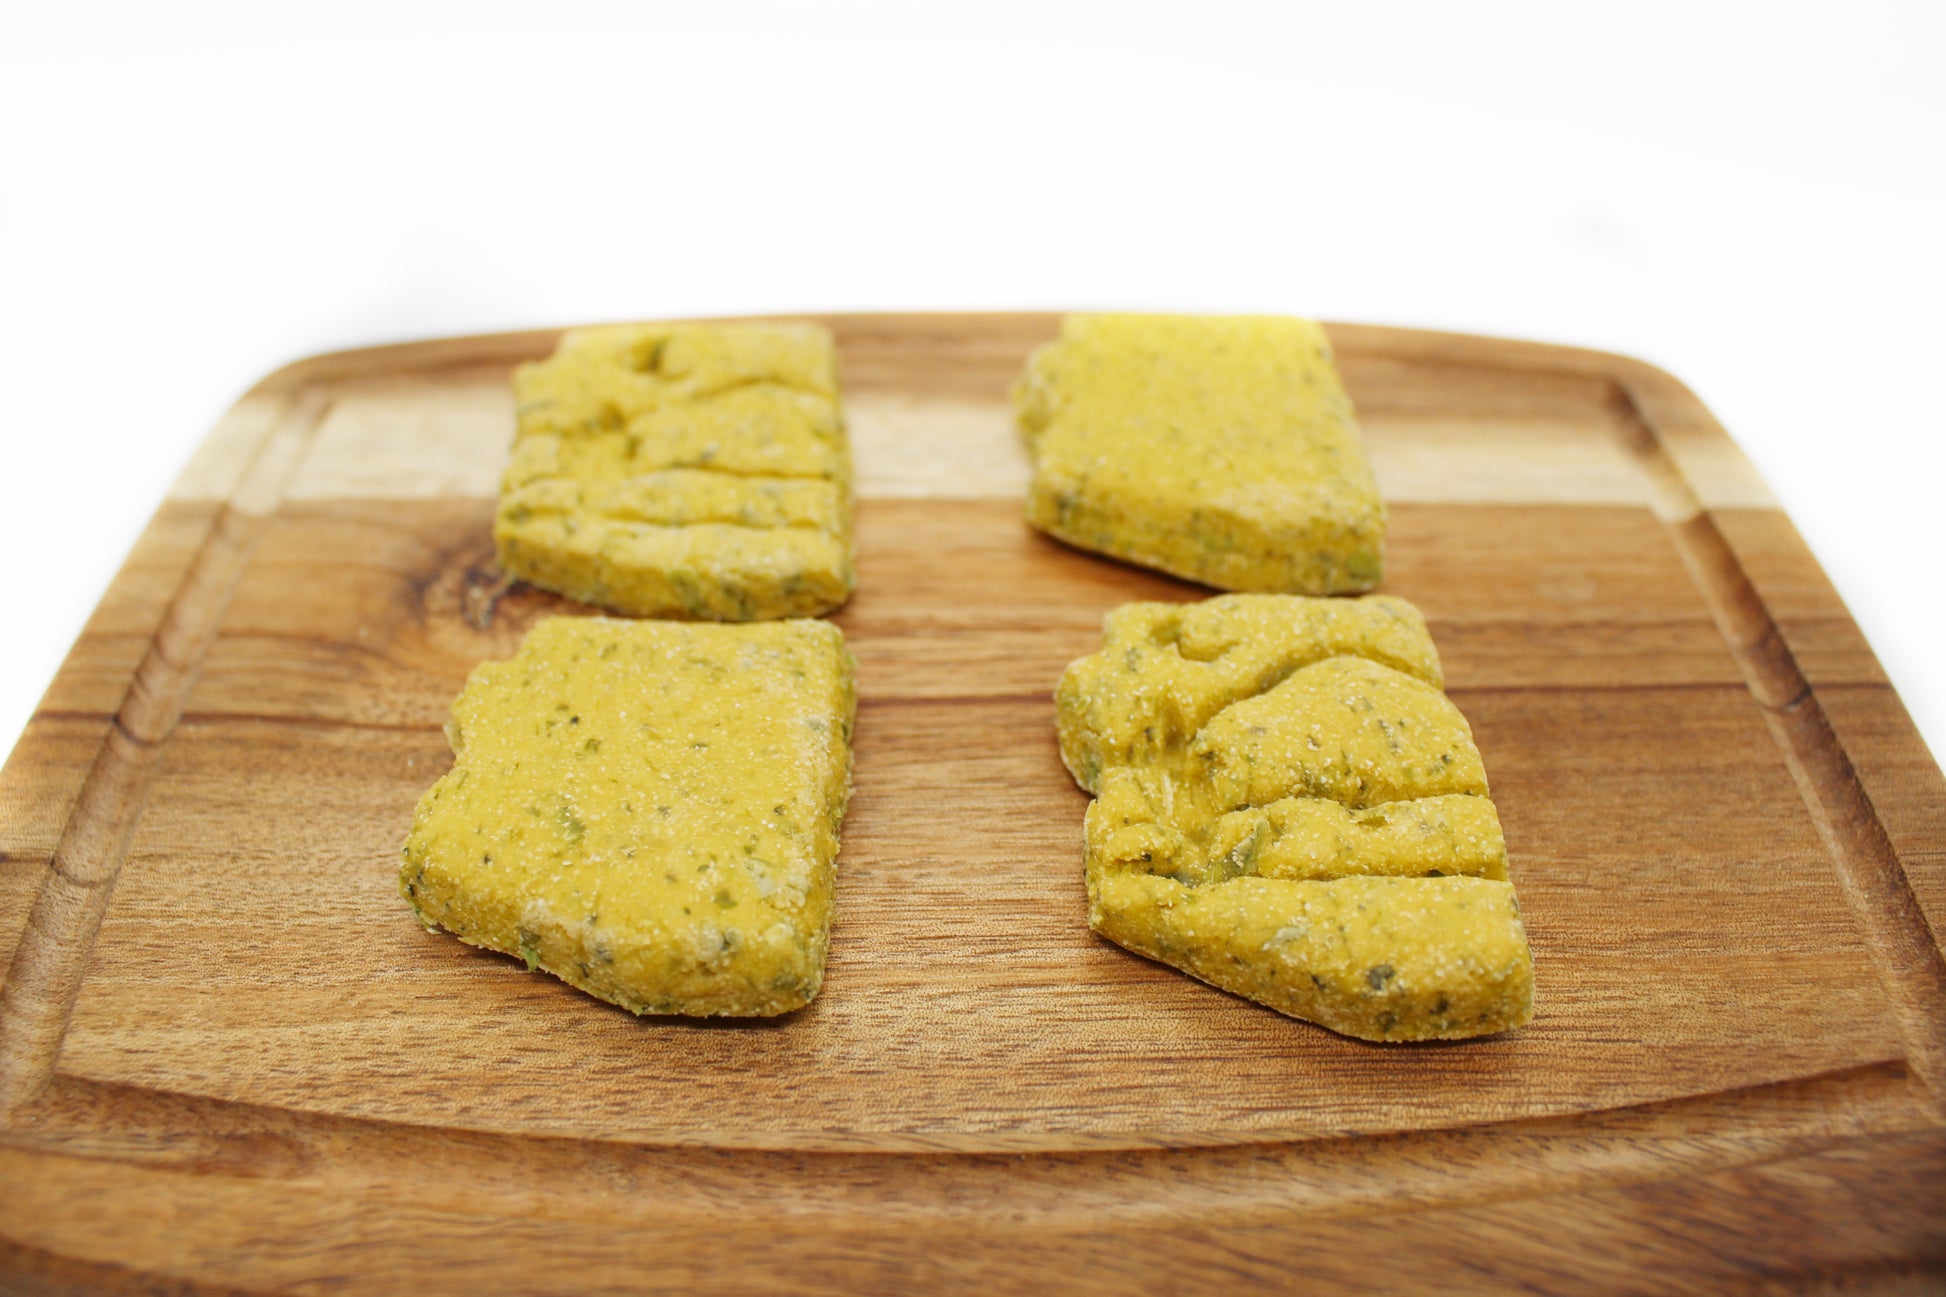 Four Arizona shaped dog treats taken from a side view. Flecks of Cilantro and Parsley can be seen in the treats.  